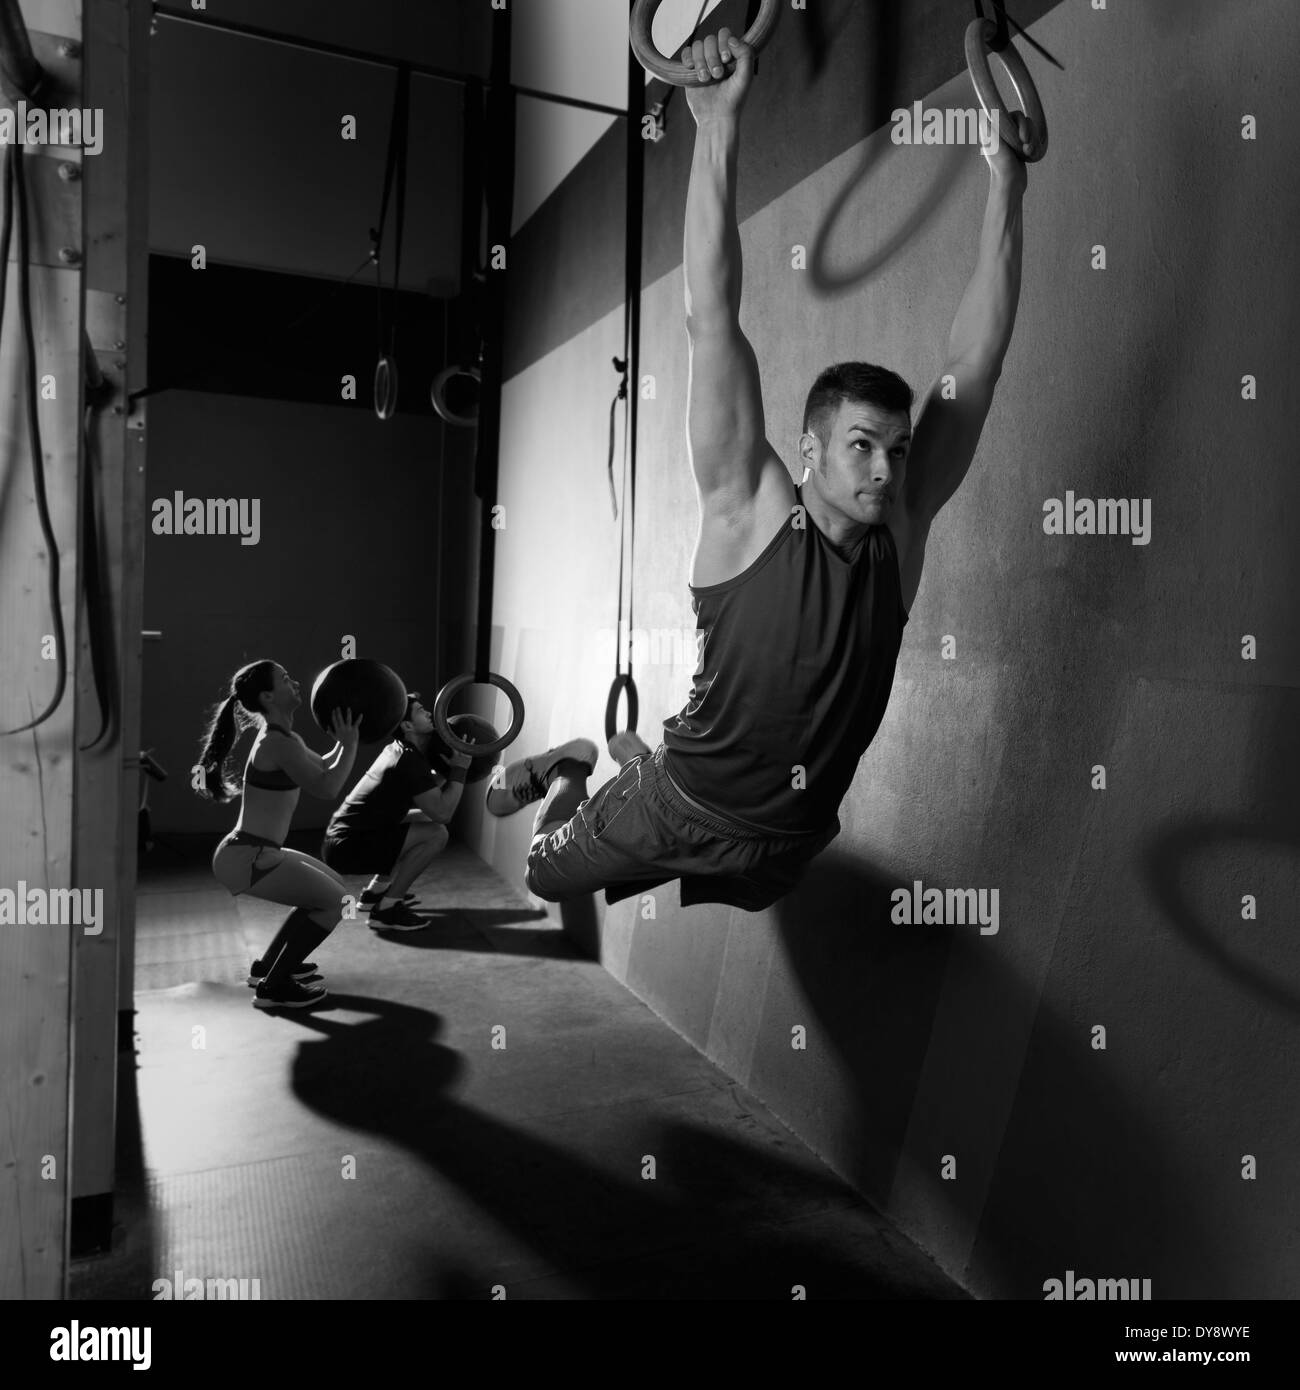 Muscle ups rings man swinging workout exercise at gym Stock Photo